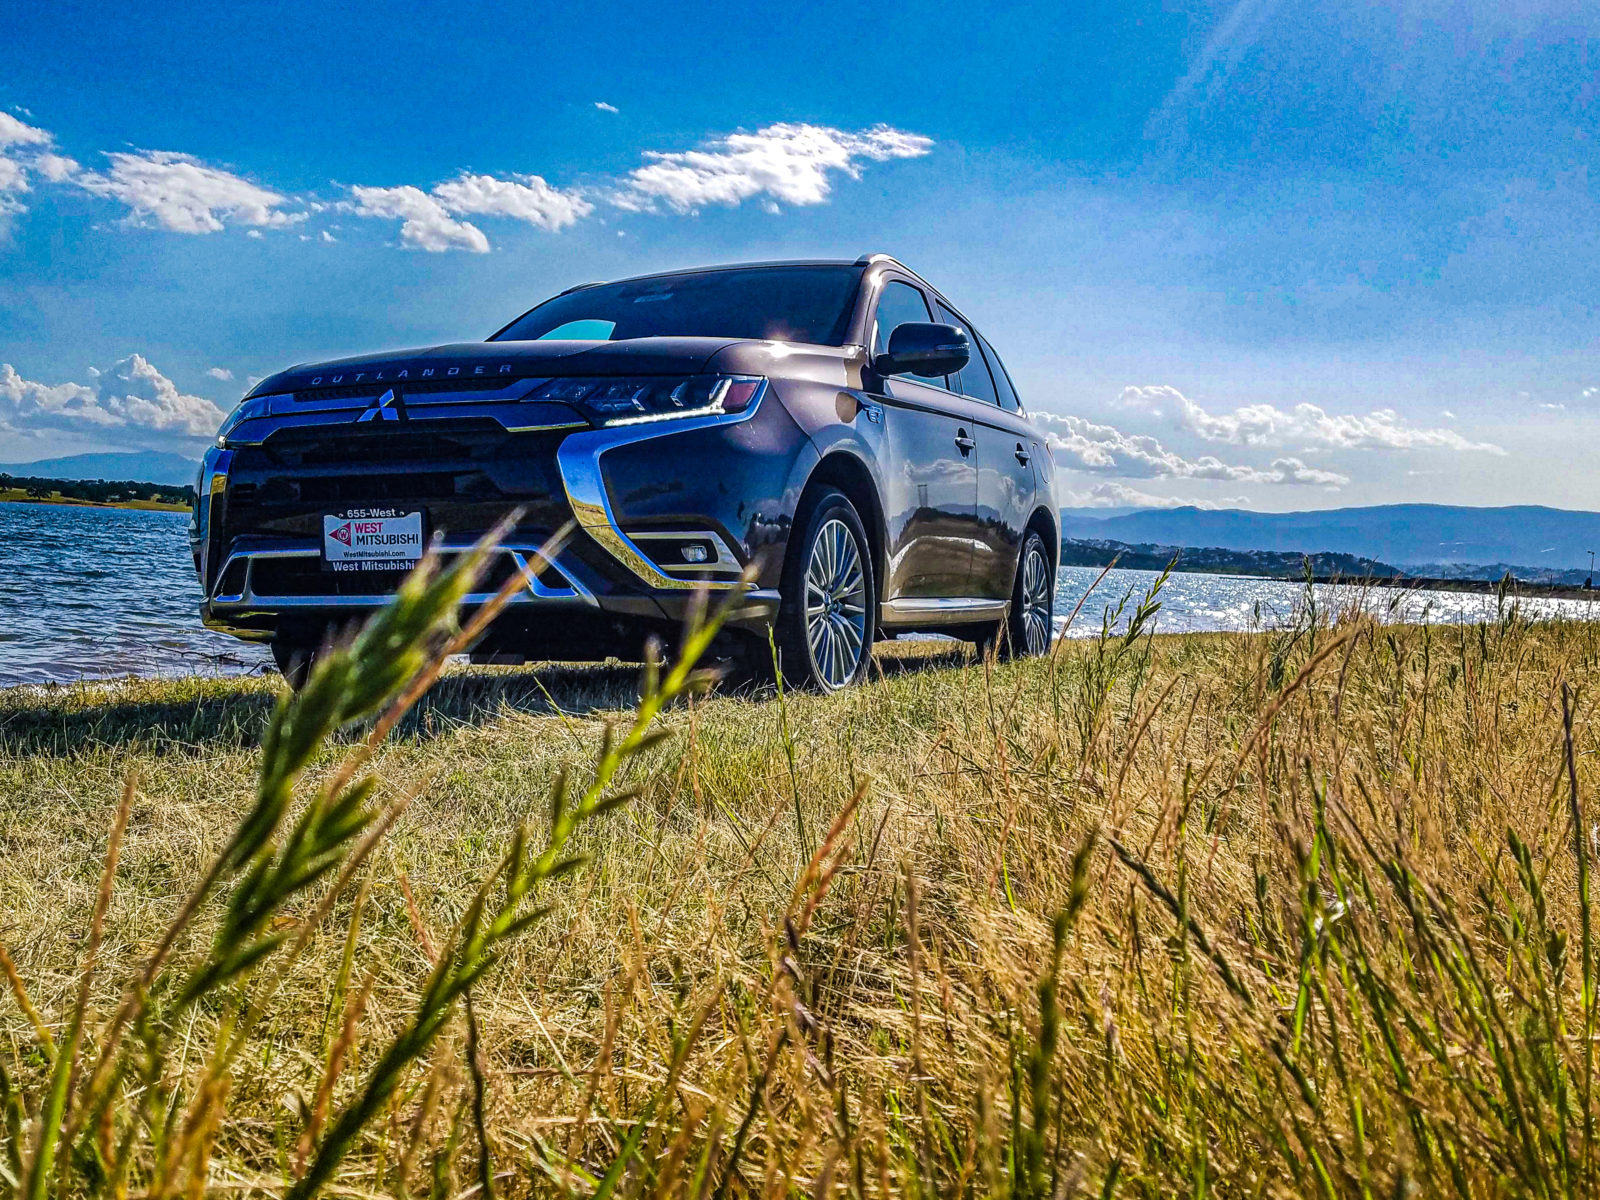 The incredible Mitsubishi Outlander PHEV from West Mitsubishi in the 530 Area Code, available for easy purchase even if your credit is poor.